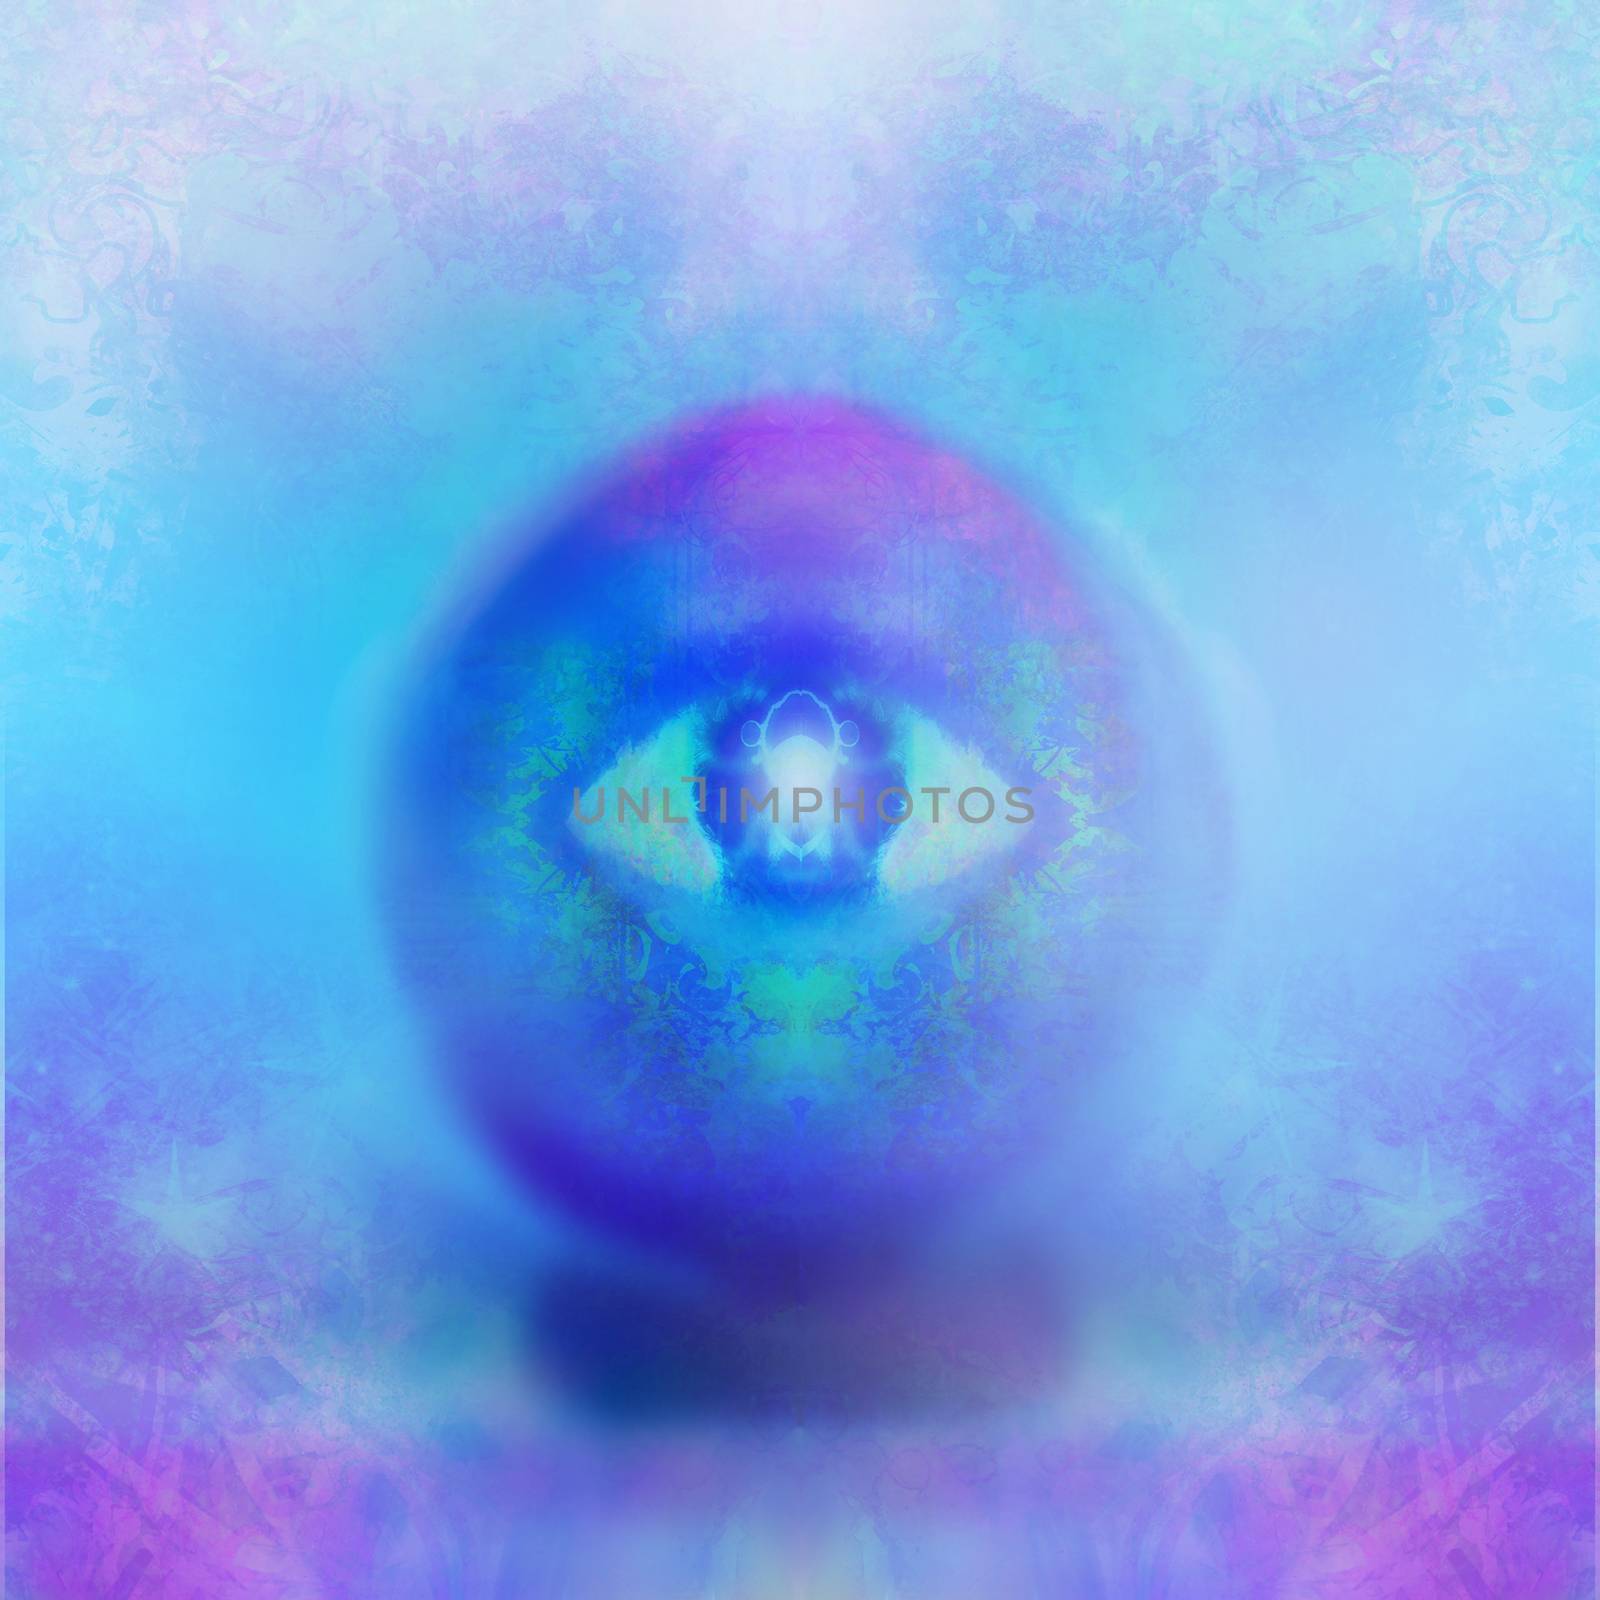 Fortune teller's Crystal Ball with eye by JackyBrown